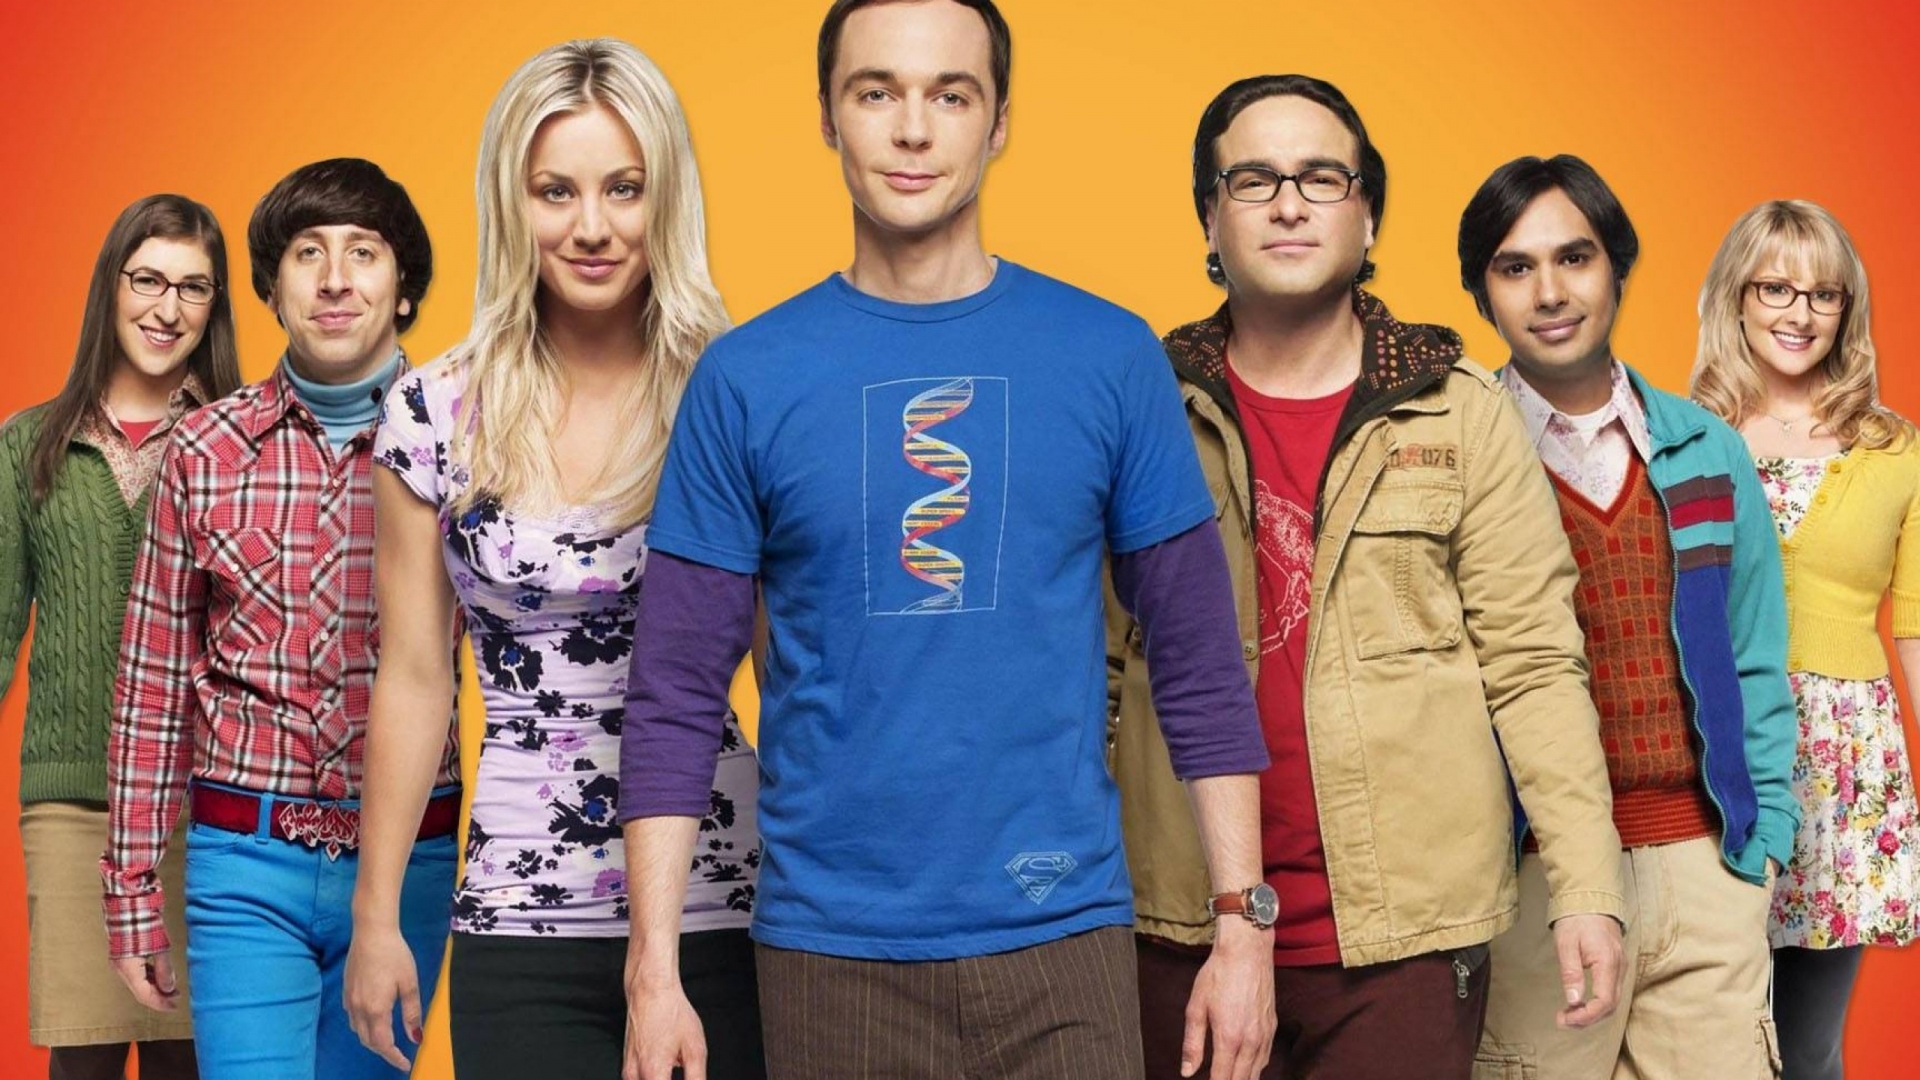 The Big Bang Theory Smiley Cast for 1920 x 1080 HDTV 1080p resolution